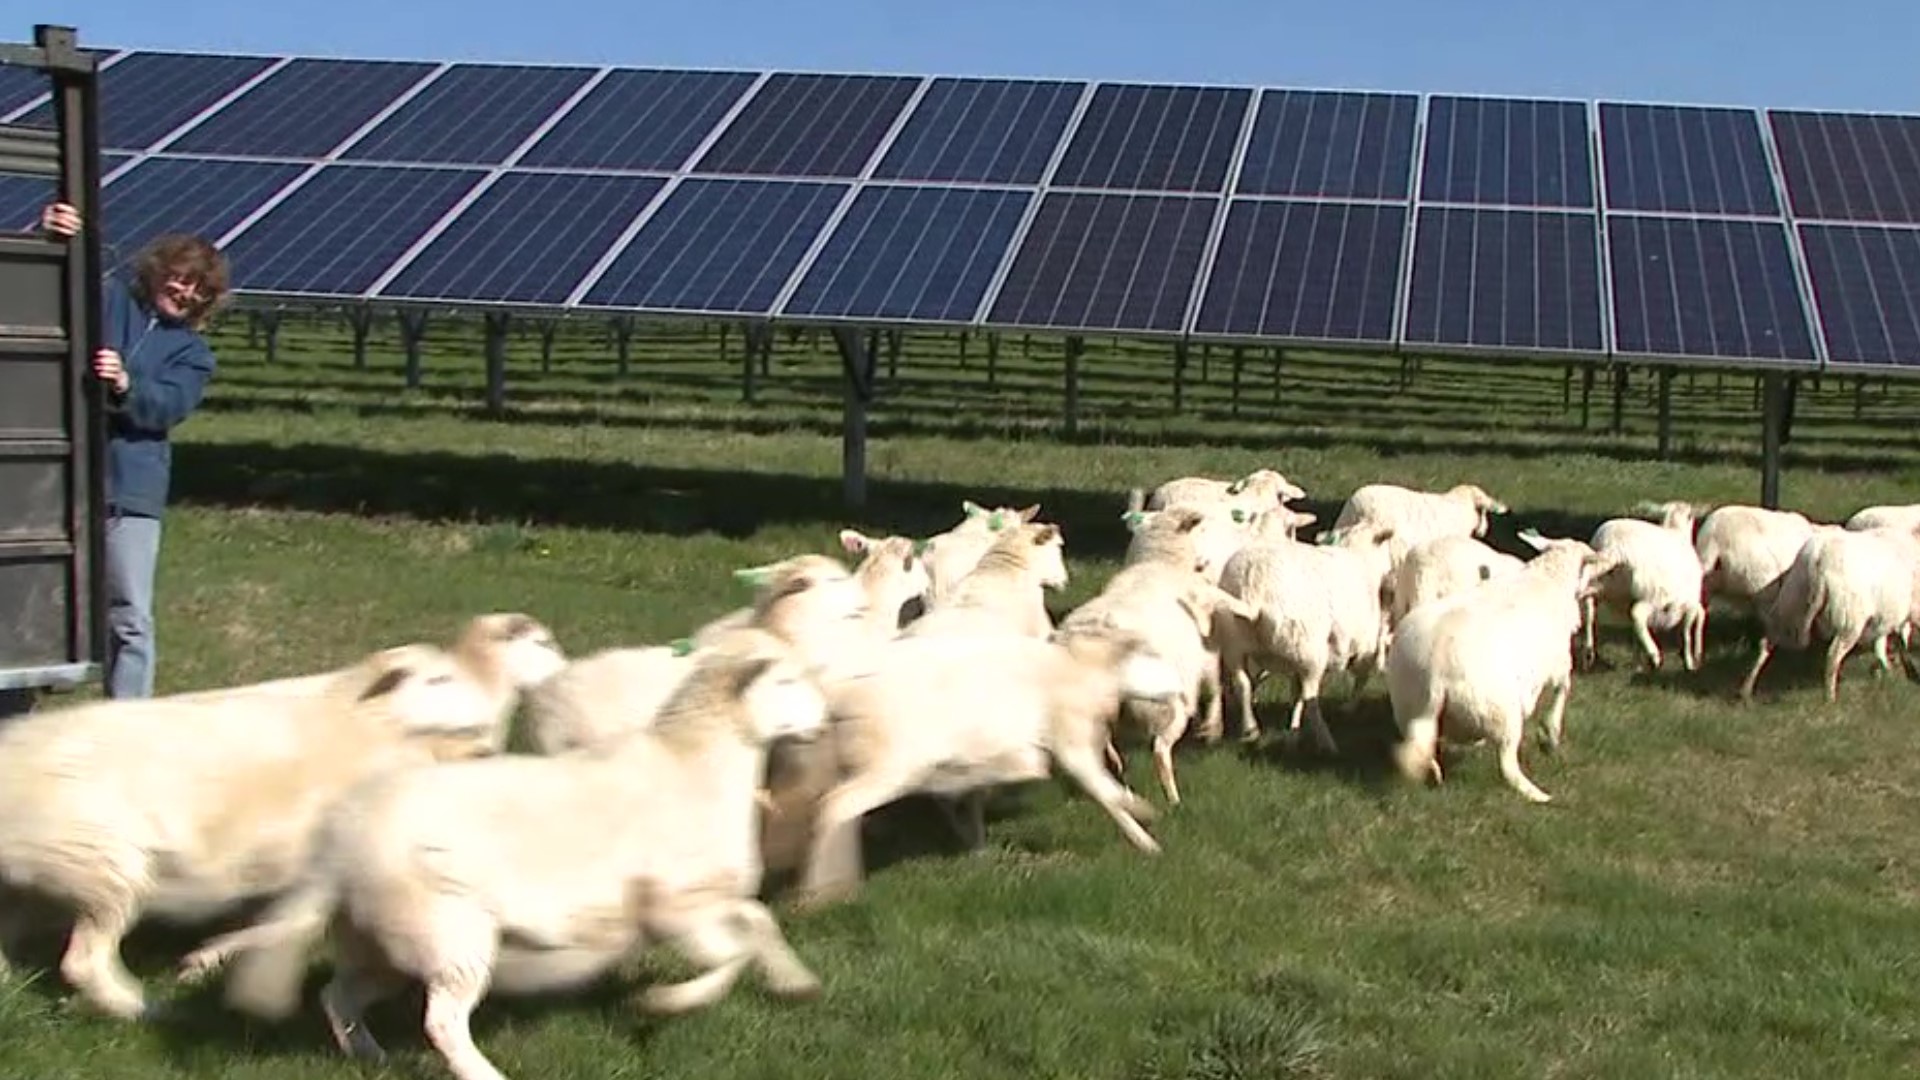 As Newswatch 16's Nikki Krize explains, the sheep are in charge of maintaining the greenery around the school's solar facility.